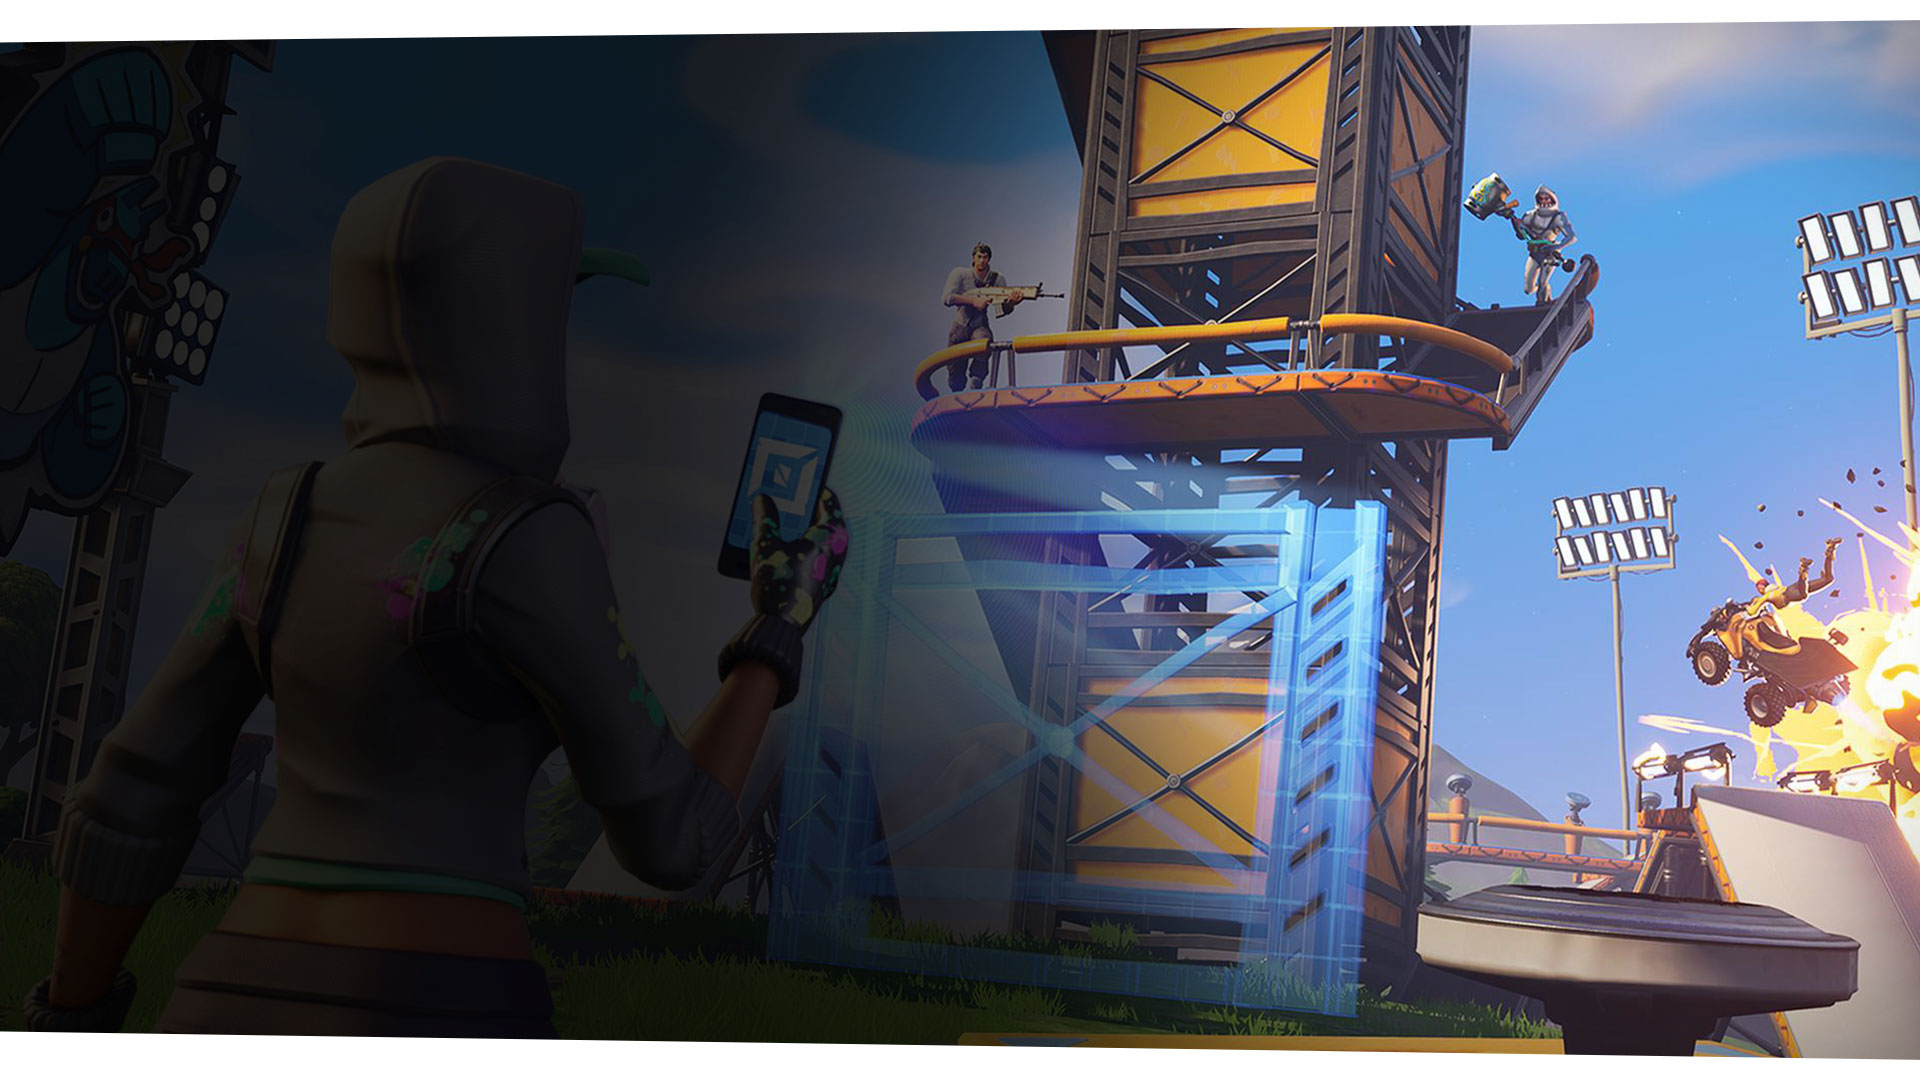 Fortnite character using her mobile device to create scaffolding